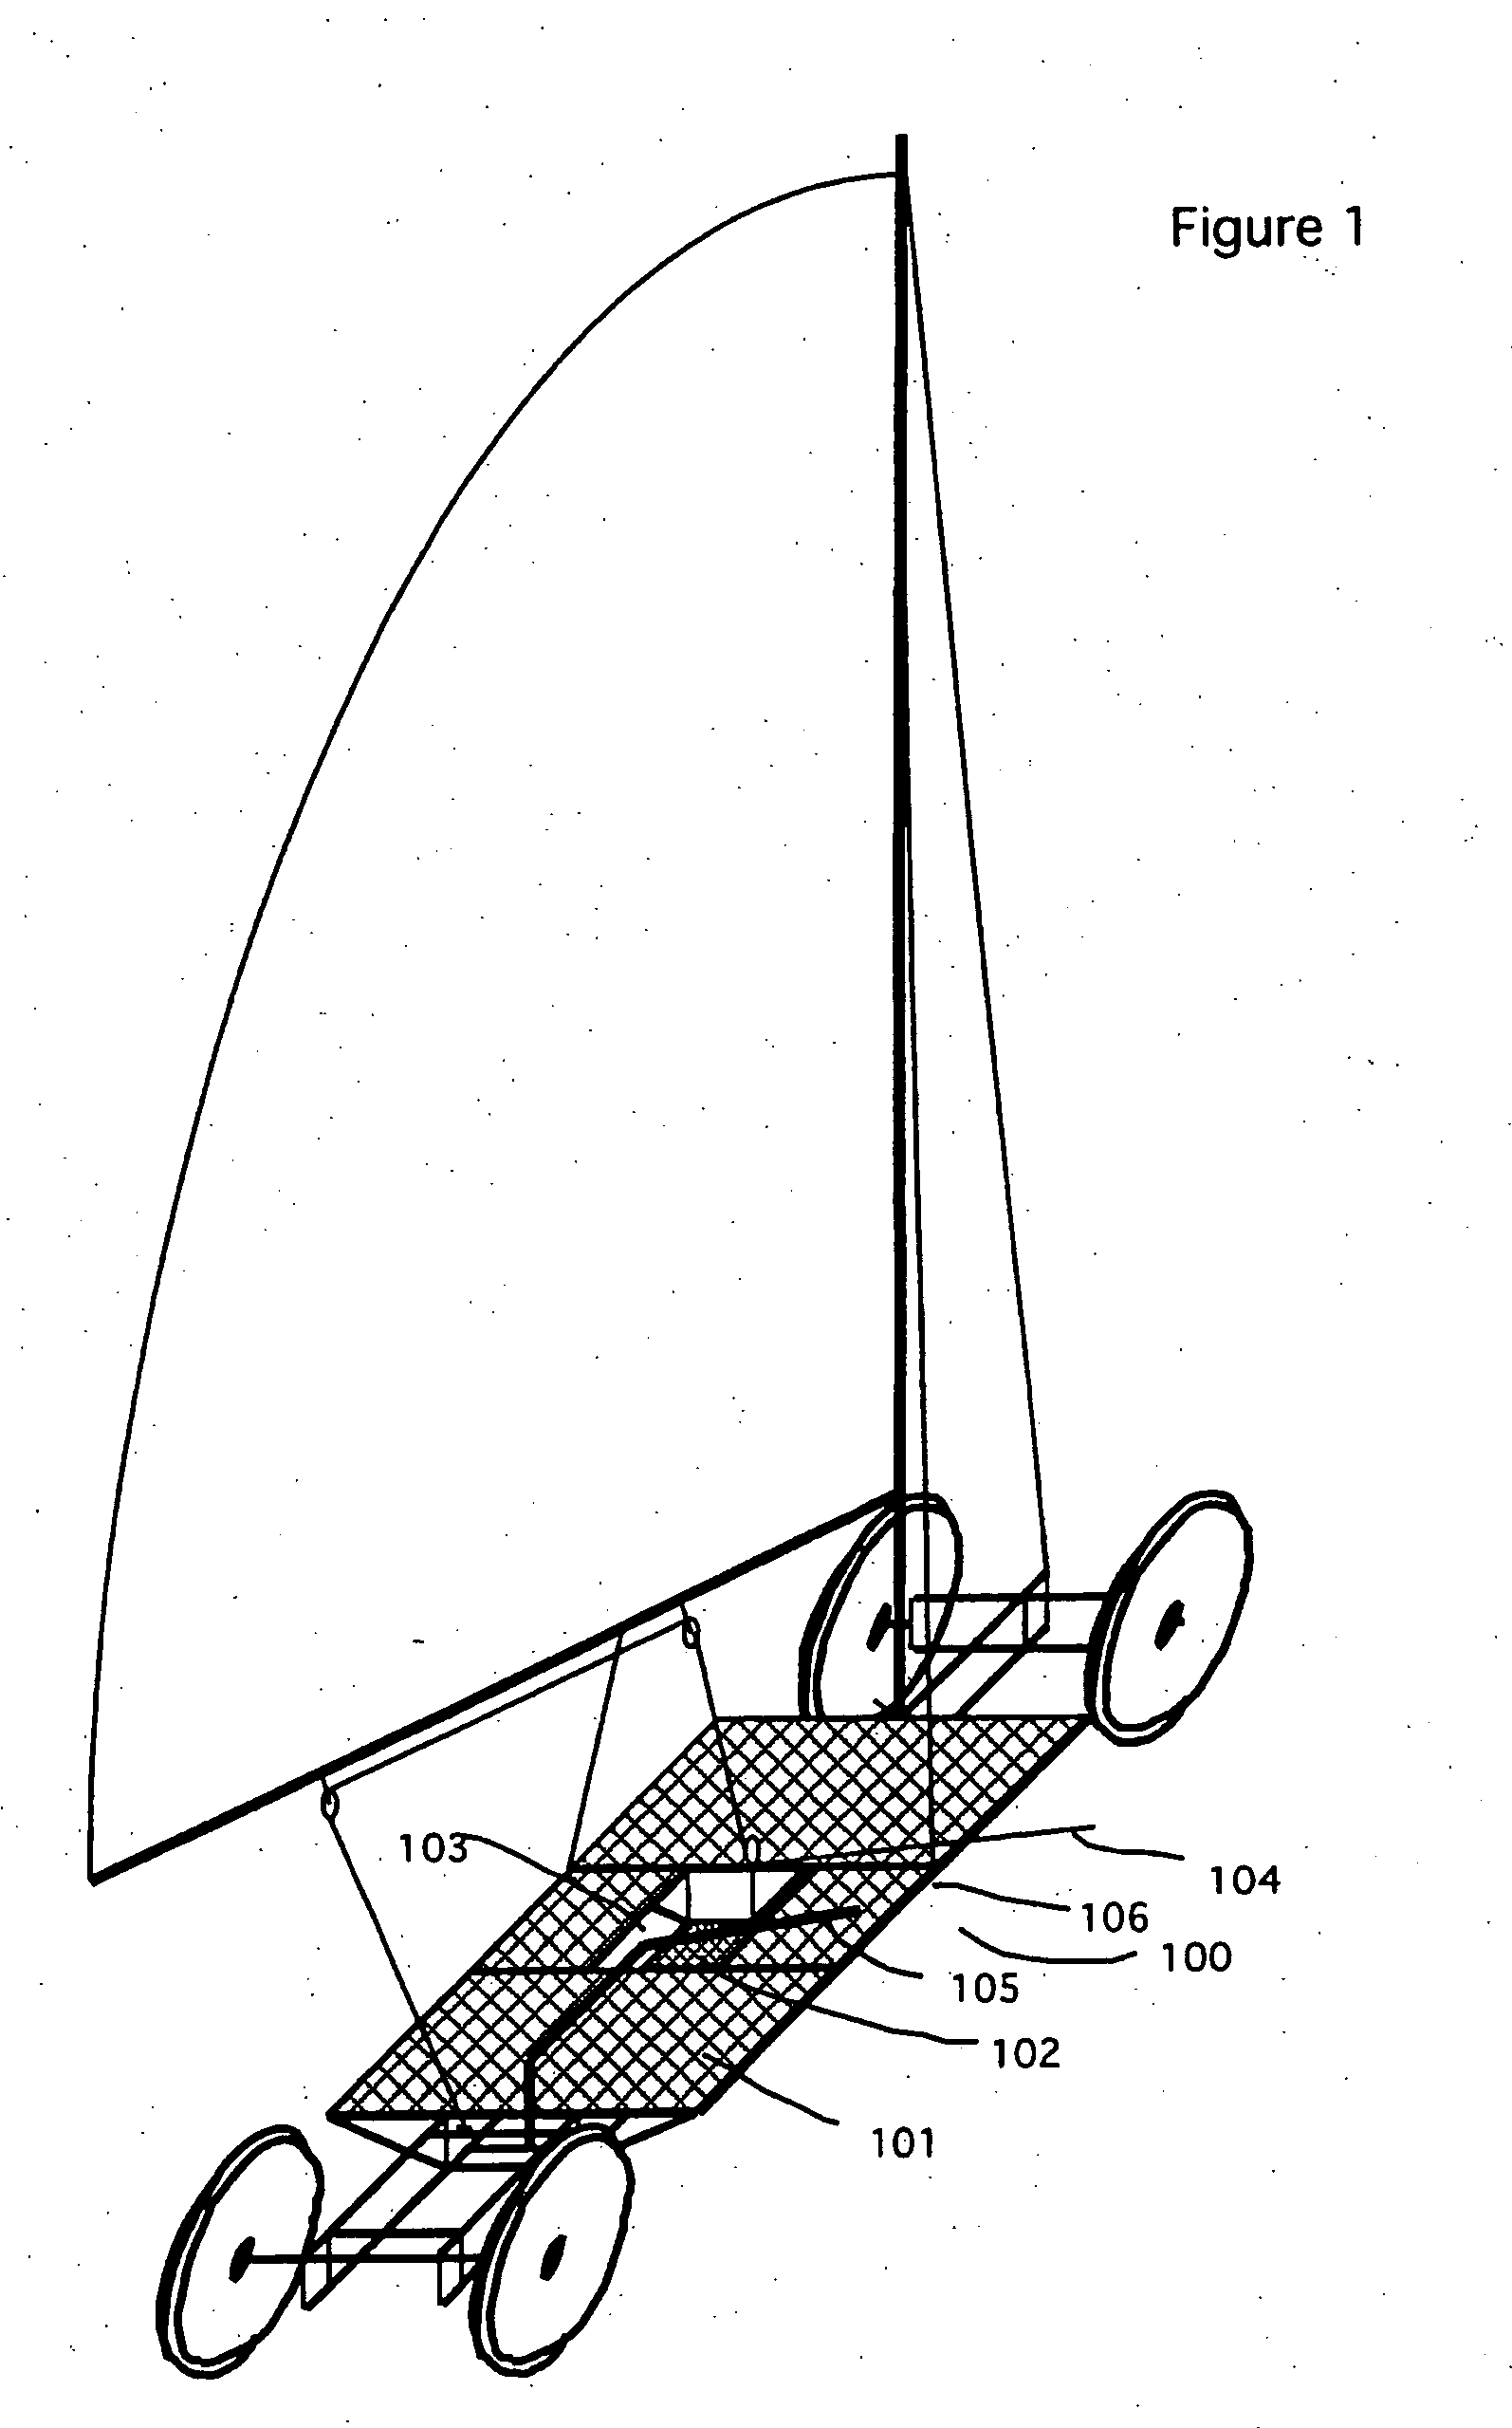 Sailing craft with wheels